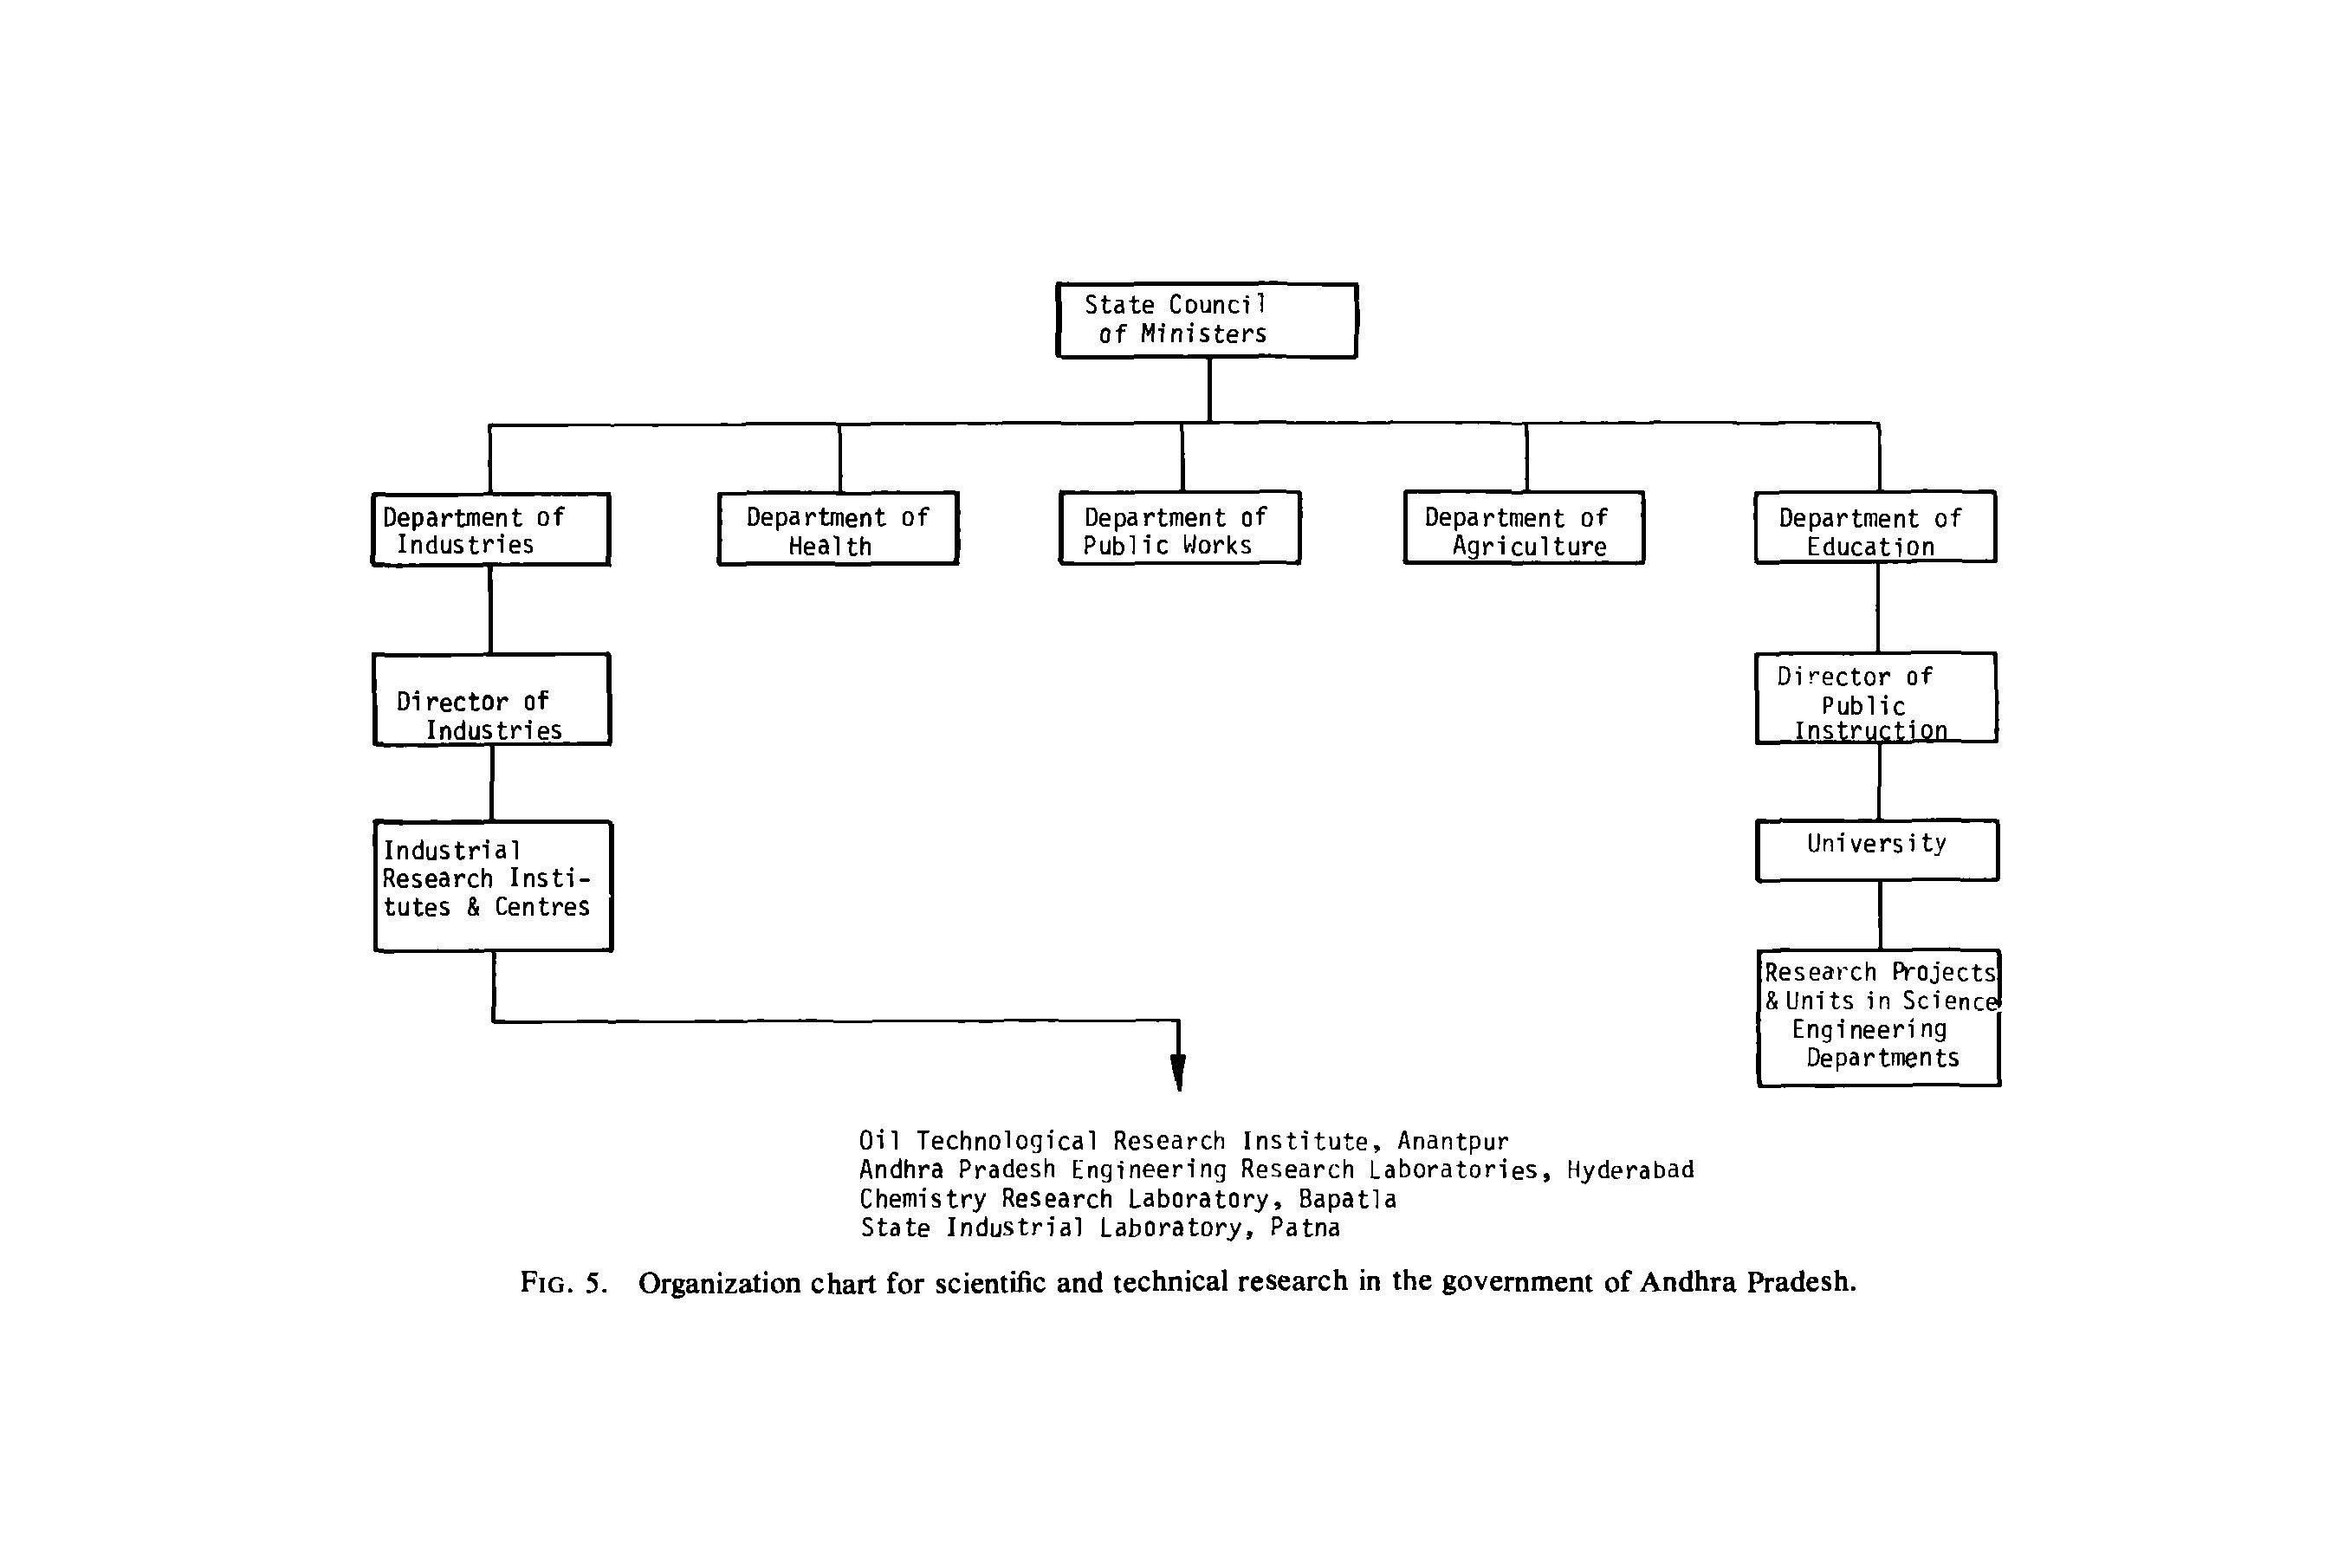 Fig. 5. Organization chart for scientific and technical research in the government of Andhra Pradesh.